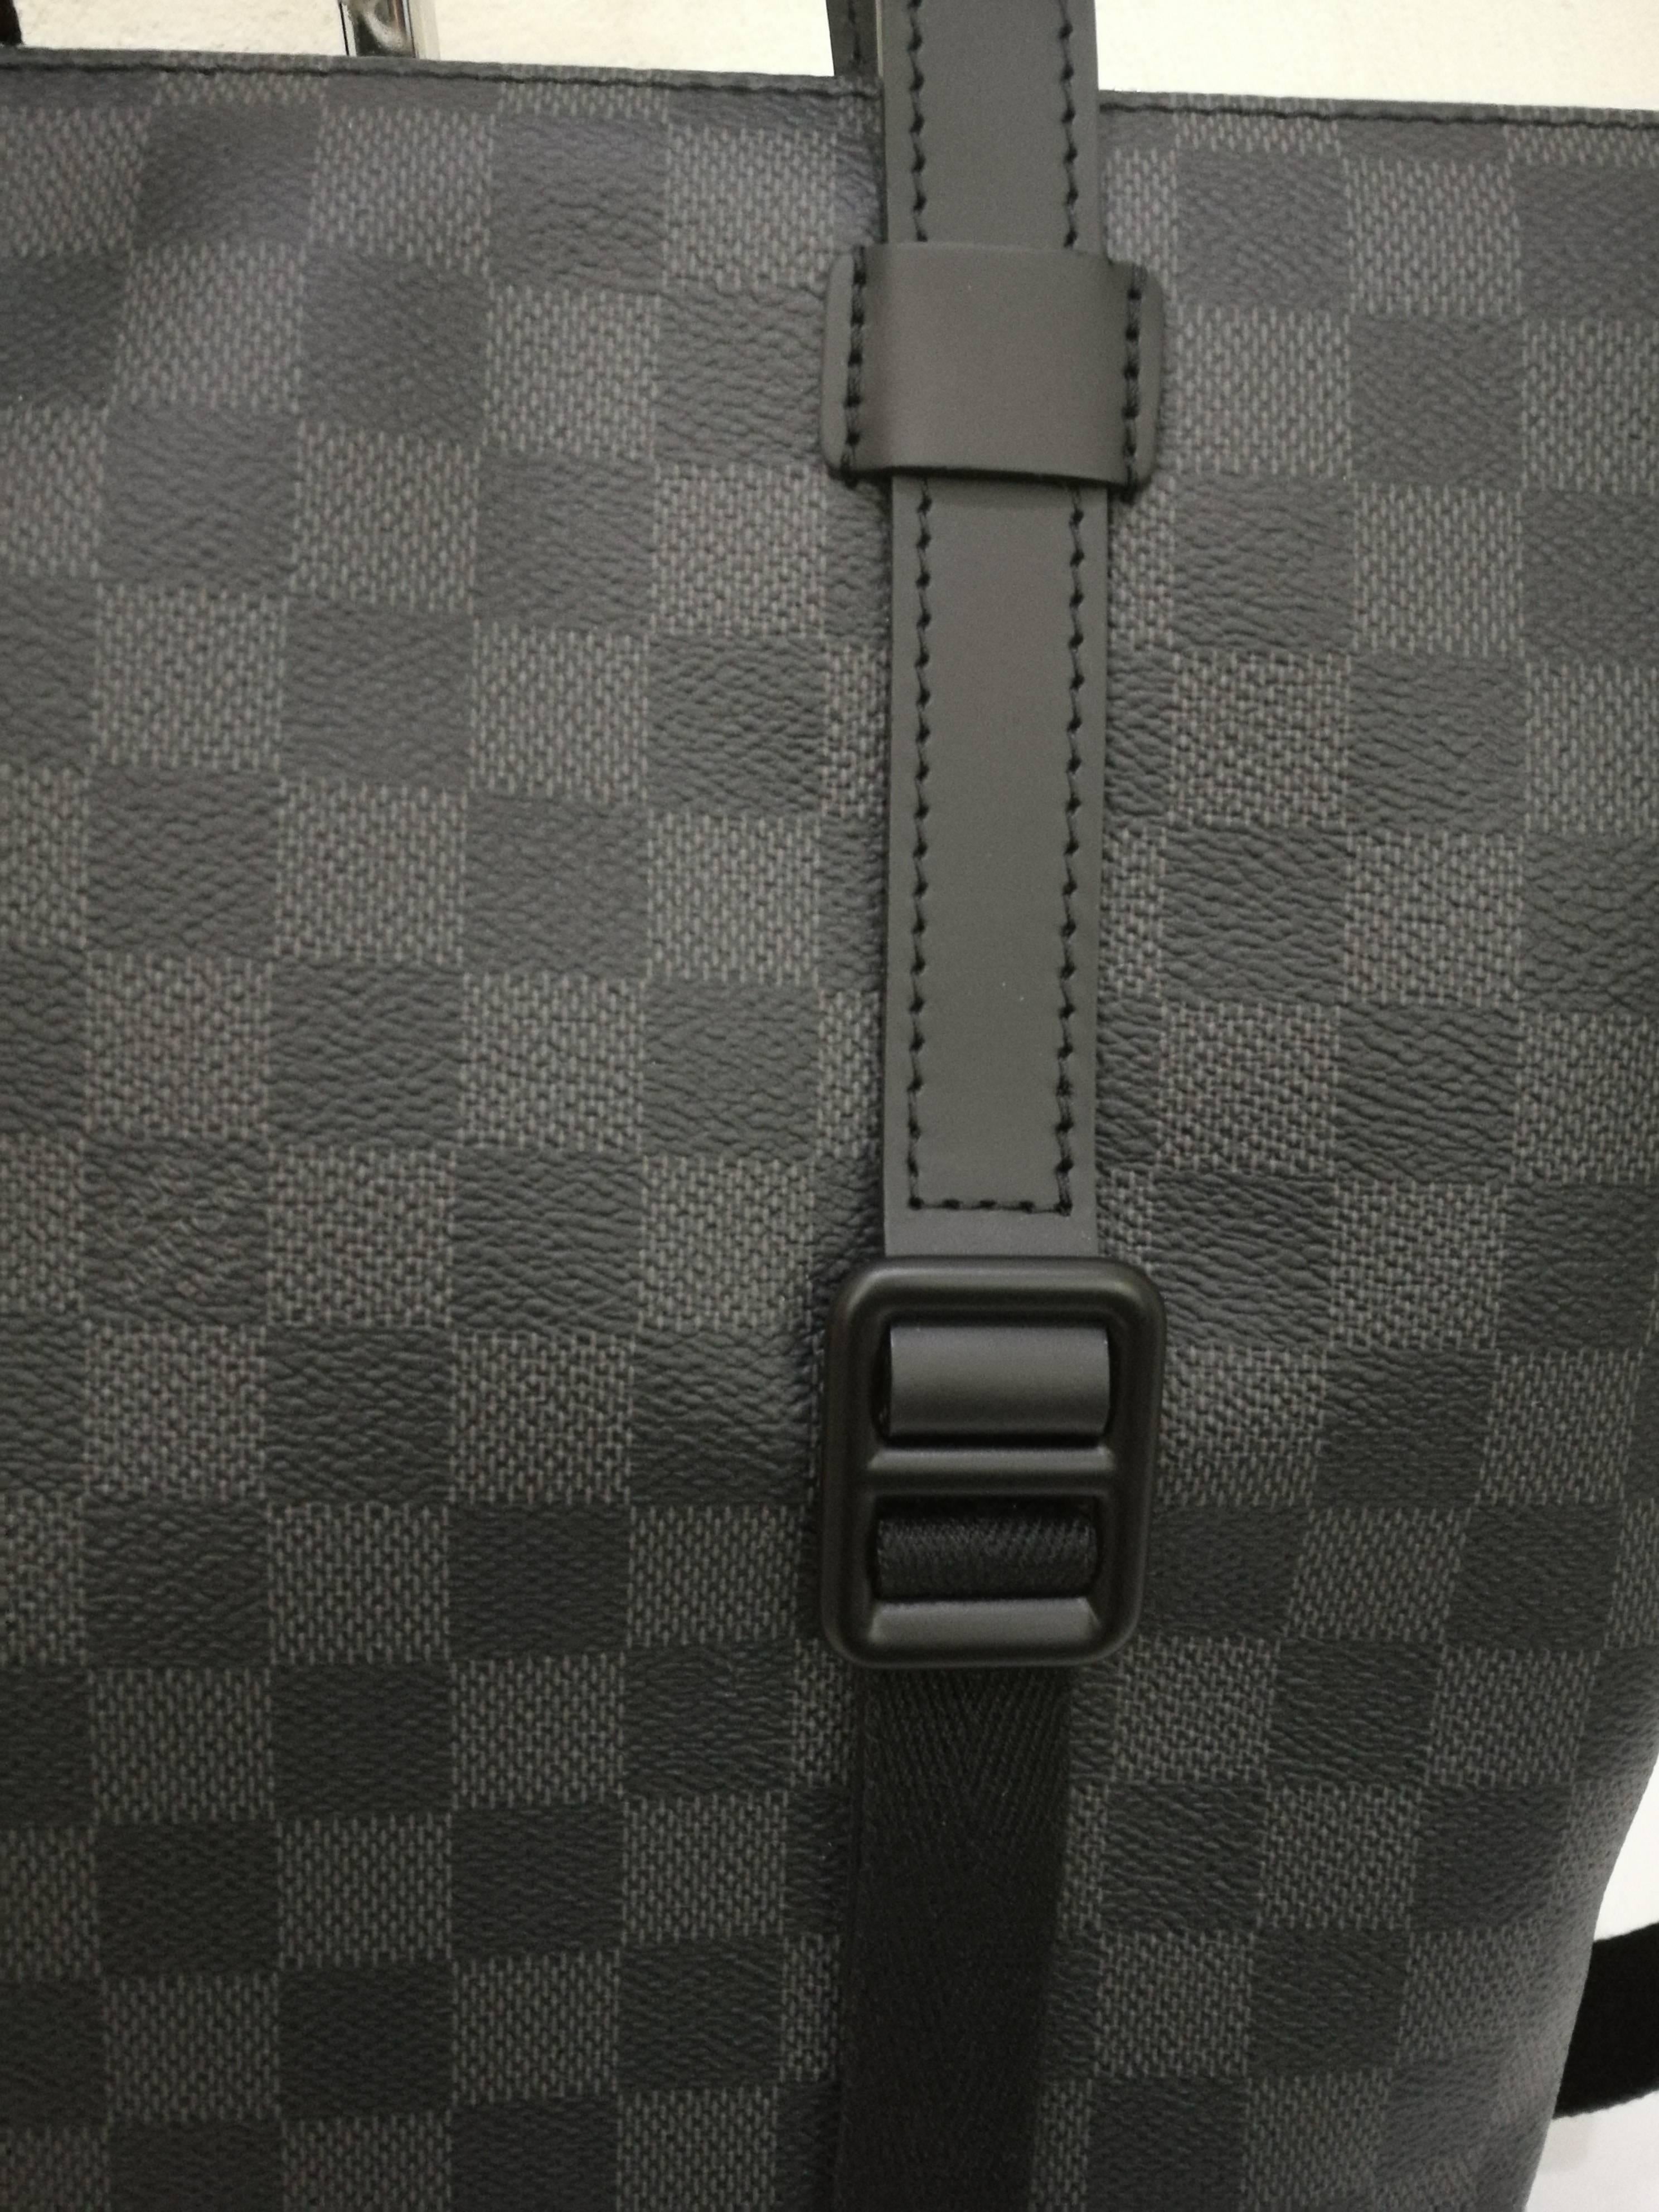 LOUIS VUITTON Damier Graphite Tadao 
This stylish cross-body bag is crafted of Louis Vuitton signature damier checked toile canvas. The bag features a nylon adjustable cross-body strap with silver hardware and rolled leather top handles with silver